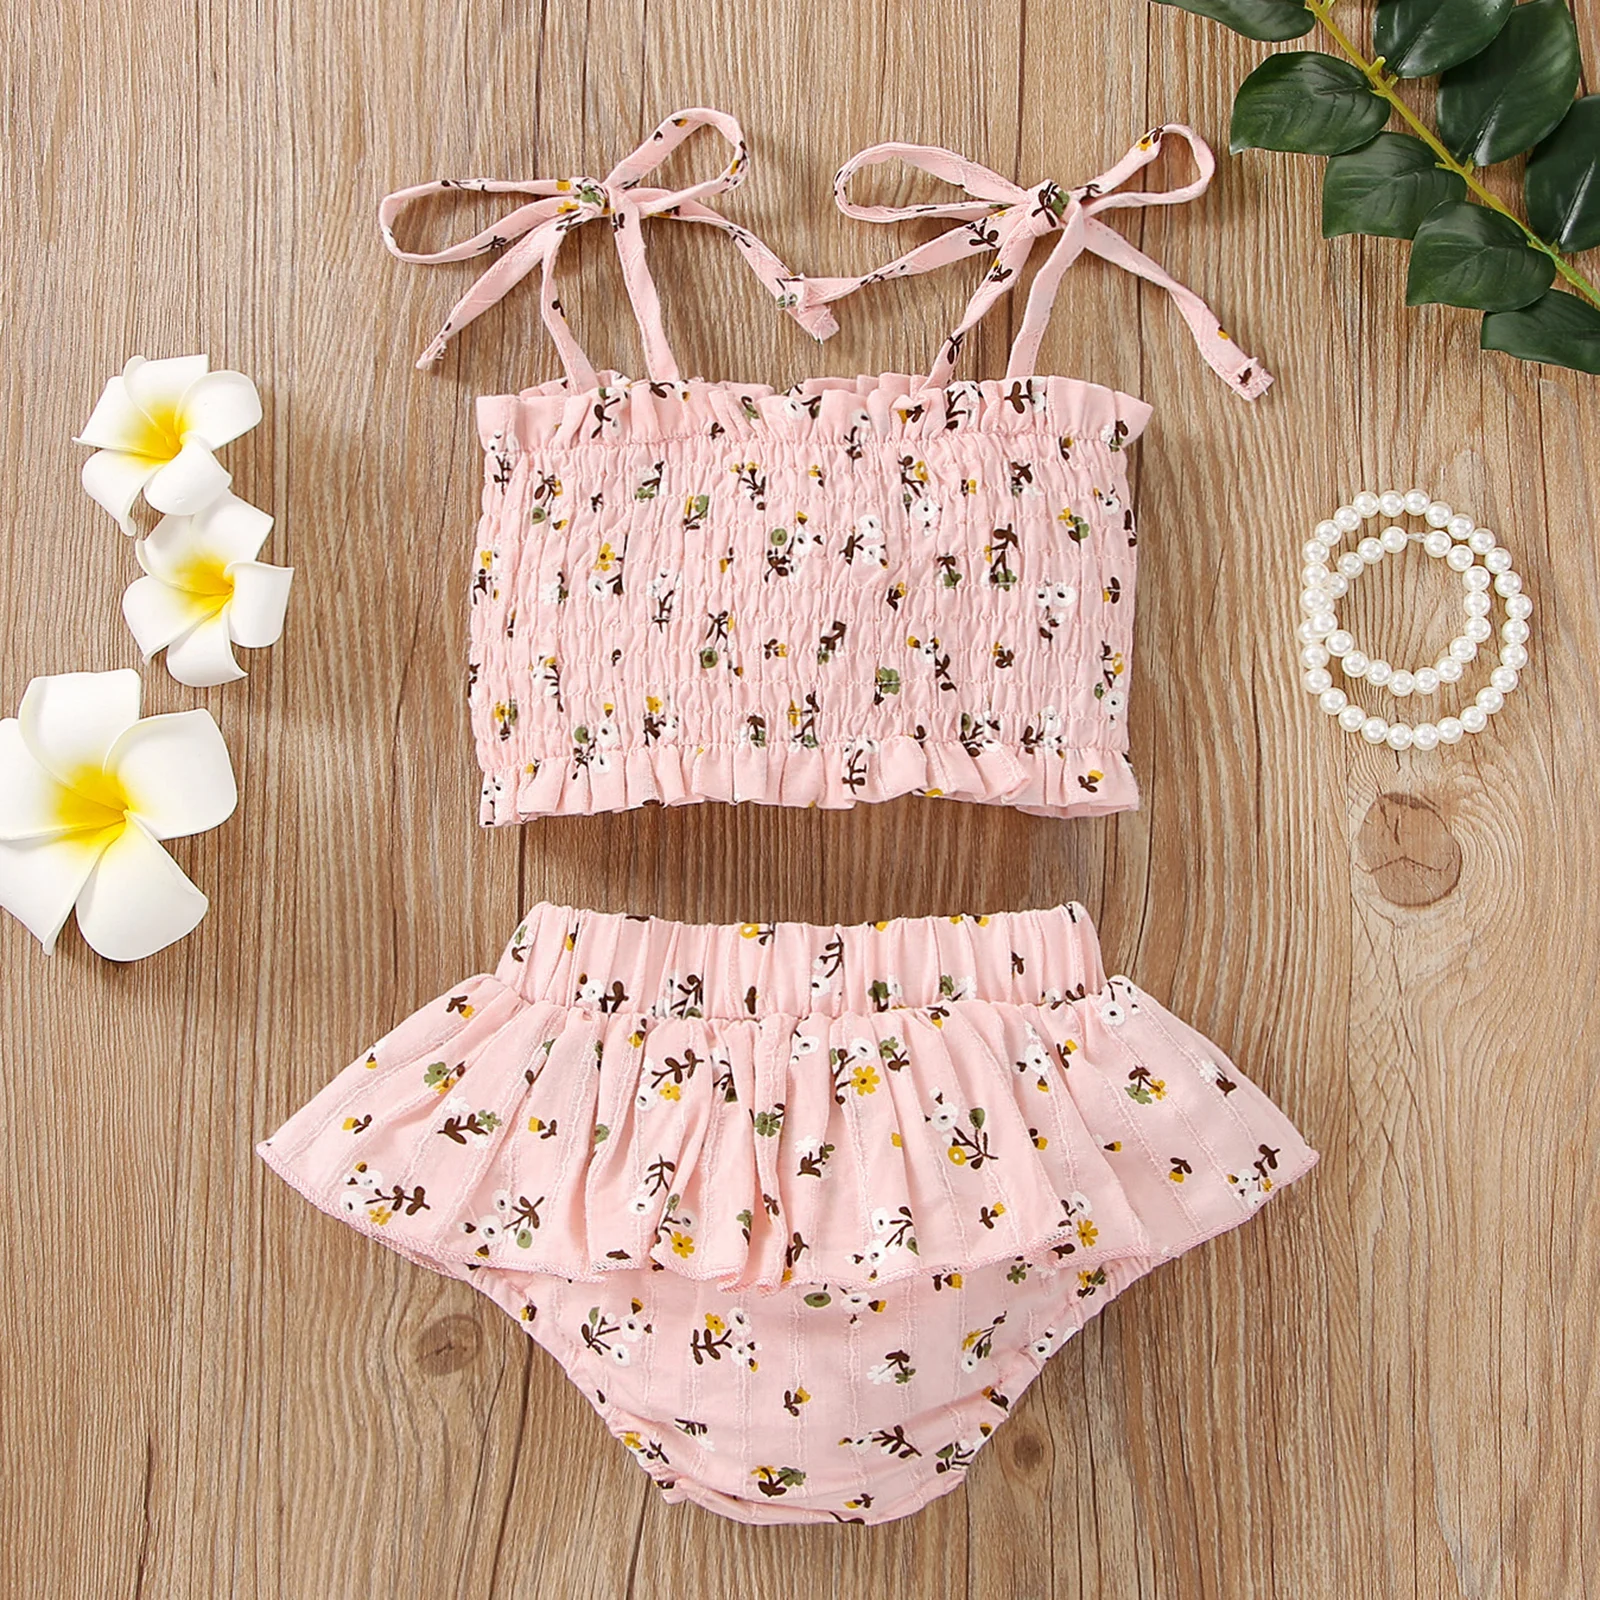 Baby Clothing Set for boy 2022 Newborn Baby Girls Shorts Outfits Clothing Set Cute Flower Print Sling Pleated Tie Up Tops+Elastic Ruffle Shorts Infant Set best Baby Clothing Set